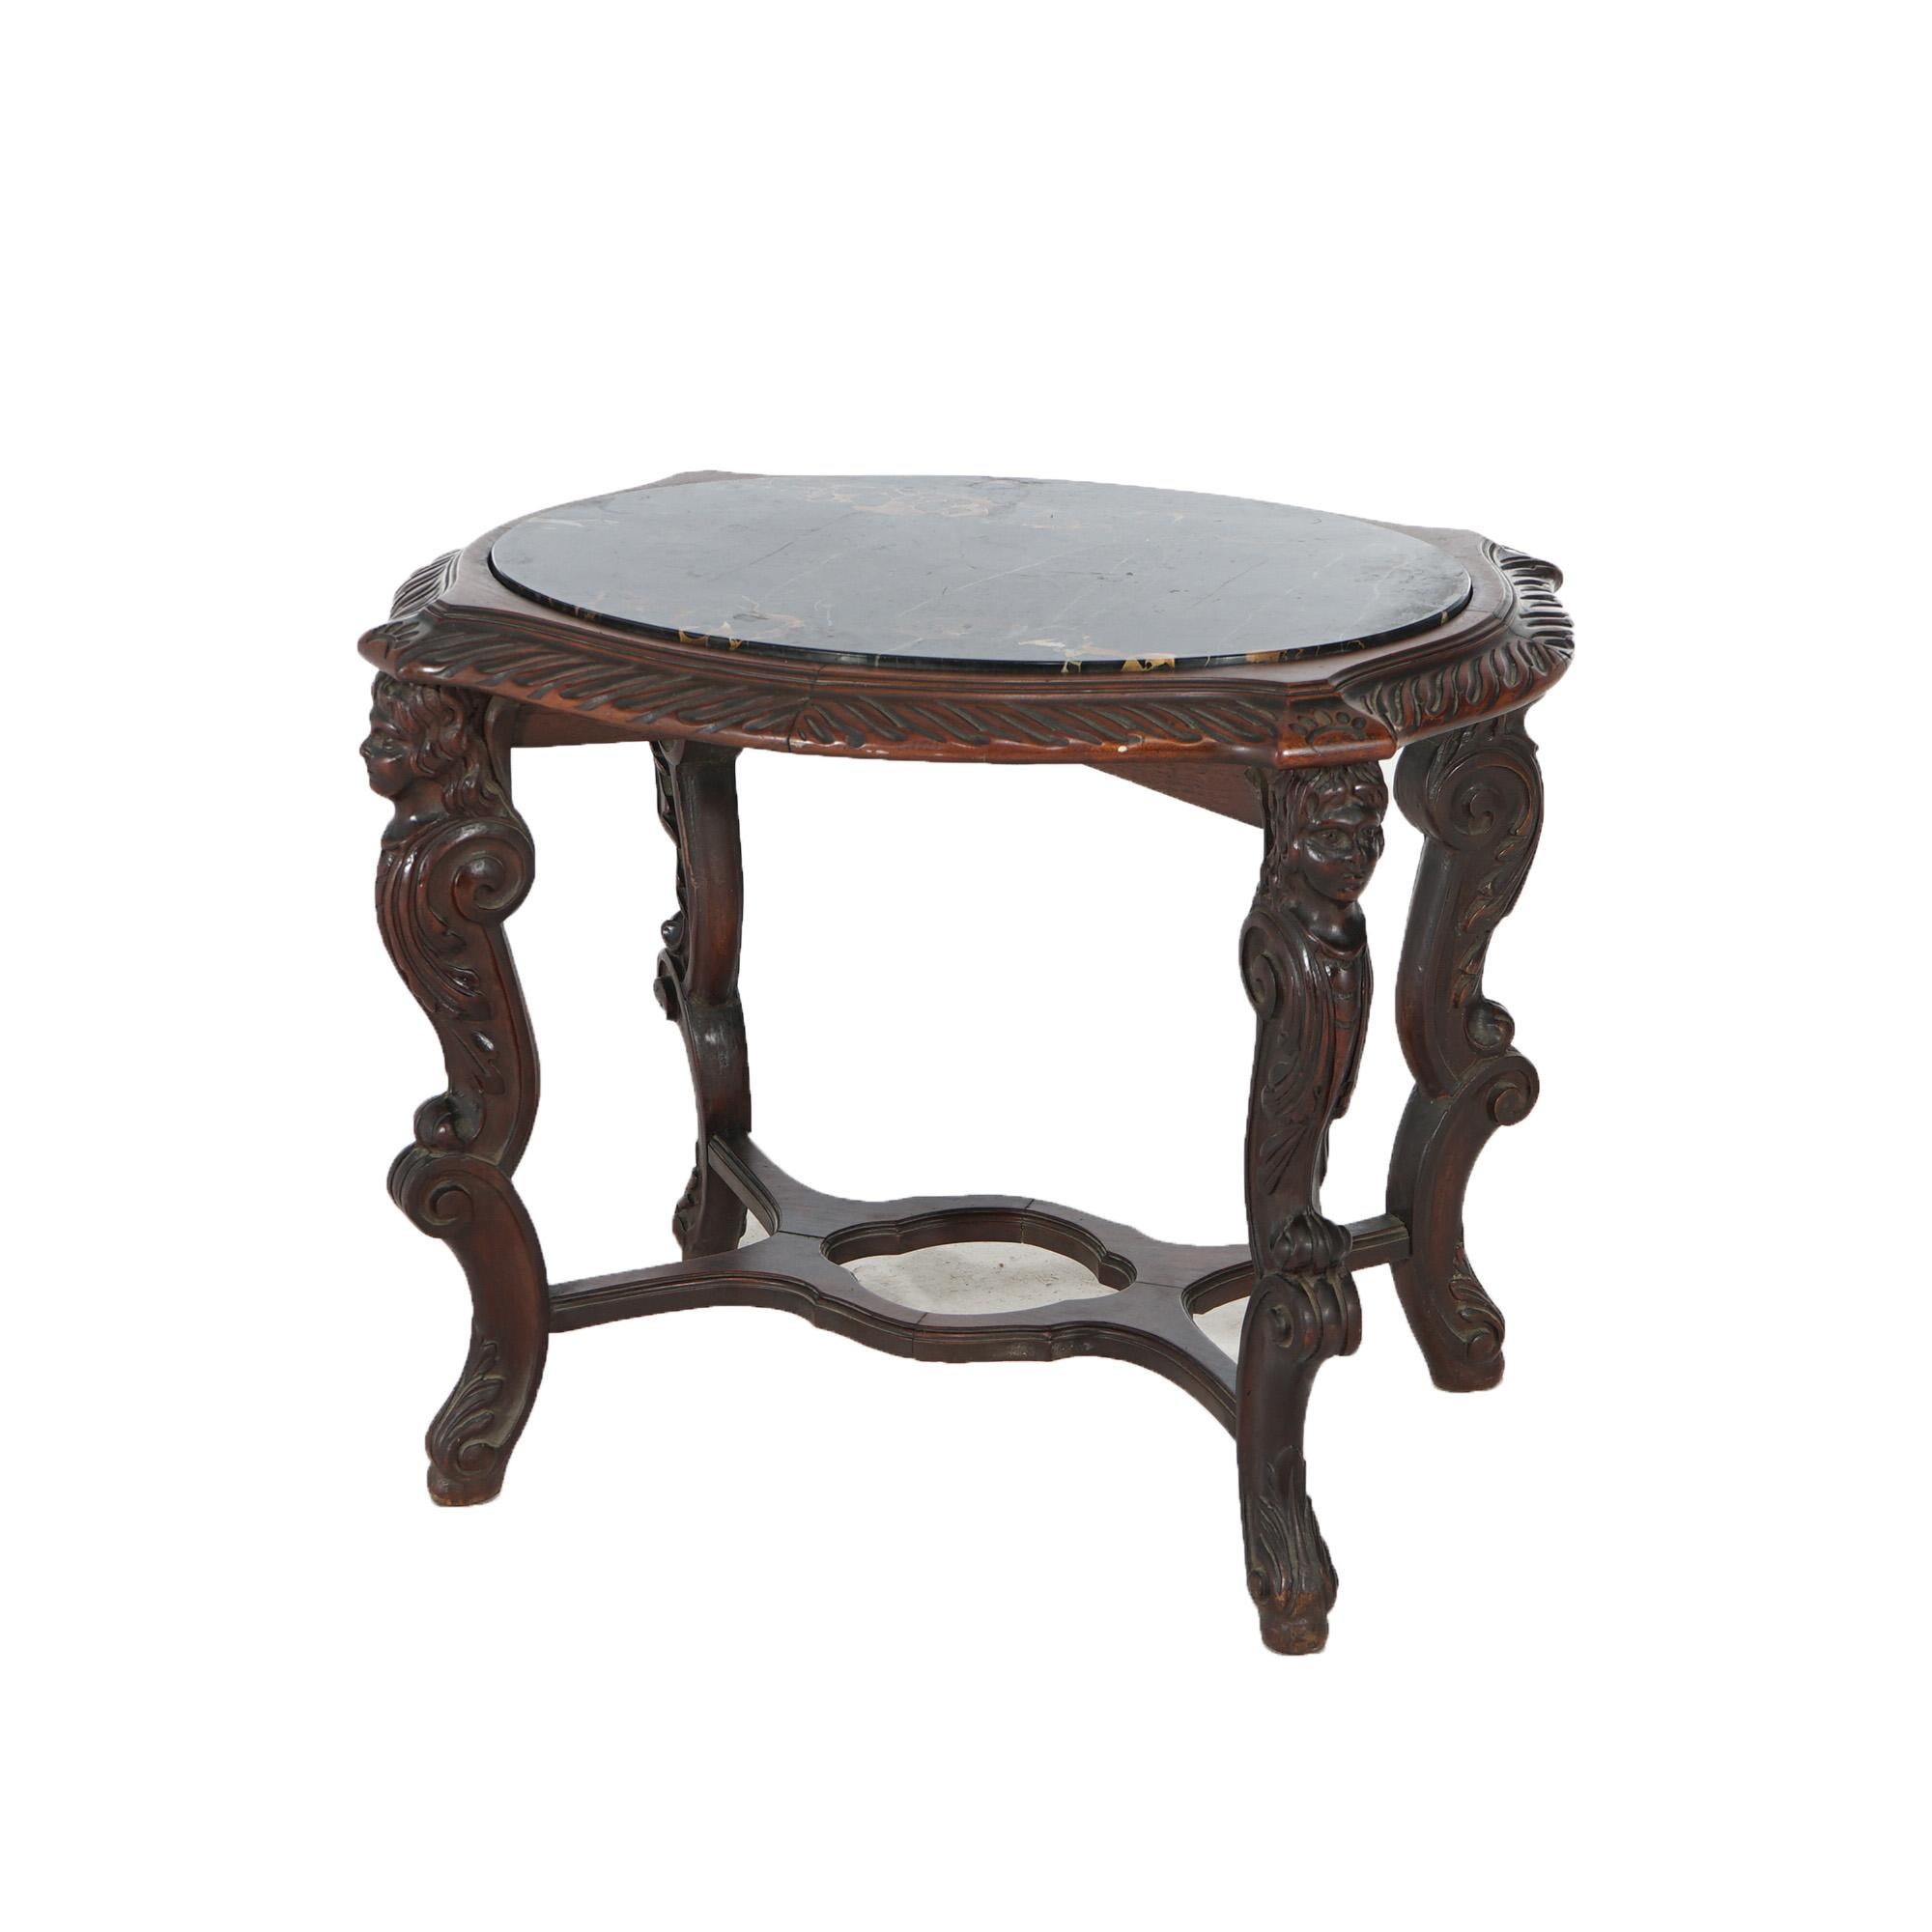 An antique Italian Renaissance figural side table offers picture frame inset black specimen marble top over walnut base having legs with carved caryatids and scroll legs, c1910

Measures - 20.5